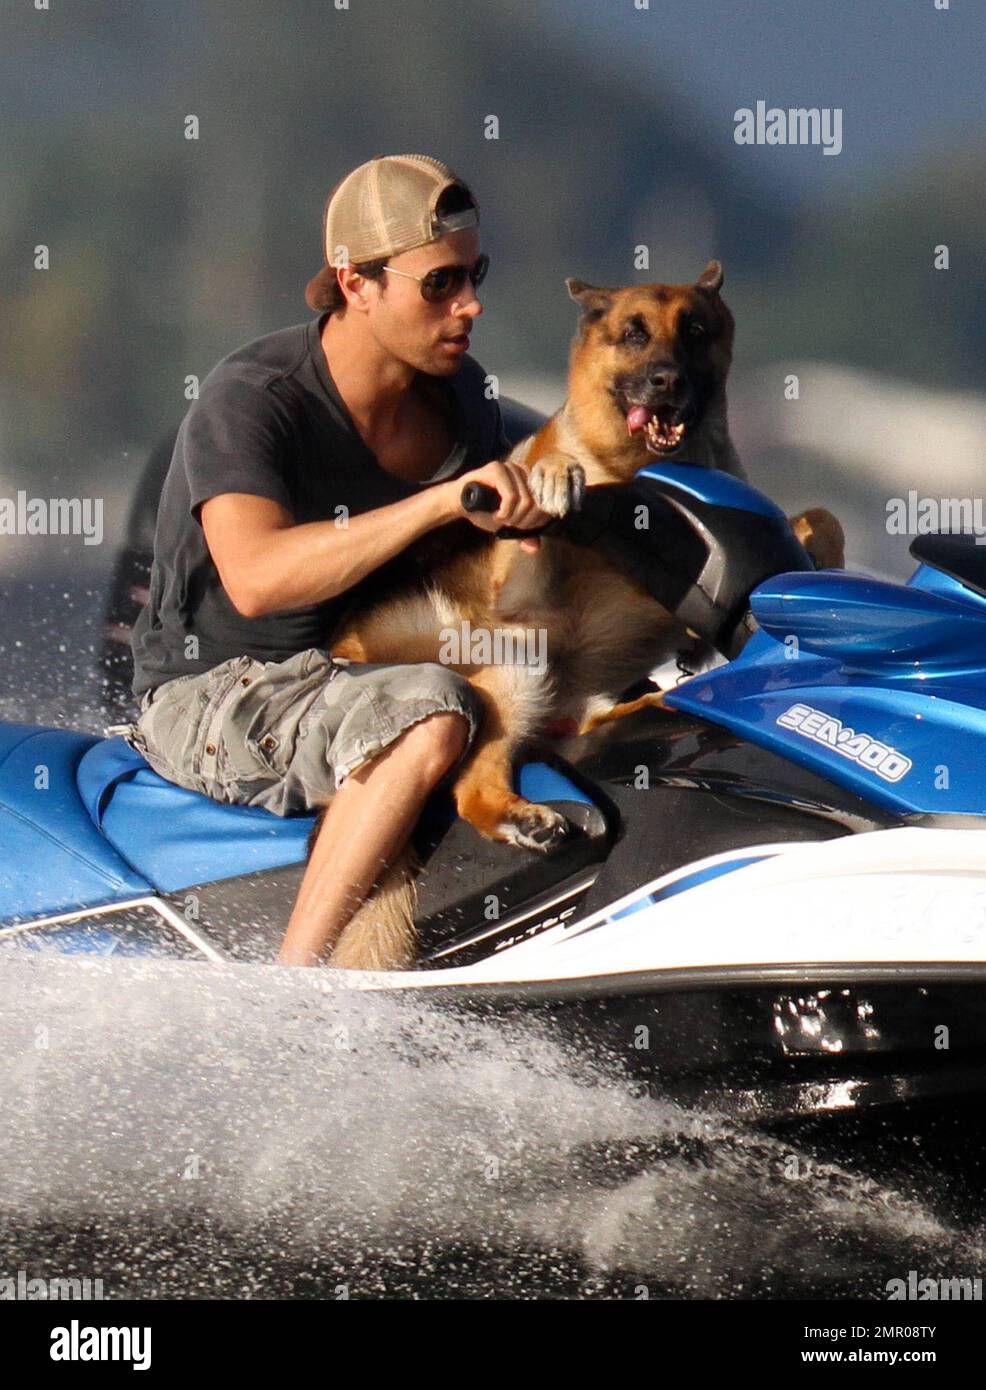 EXCLUSIVE!! Pop music superstar Enrique Iglesias takes to the waves and the  skies with a video crew to film his action-packed lifestyle in Miami.  Iglesias took to the sea in his boat